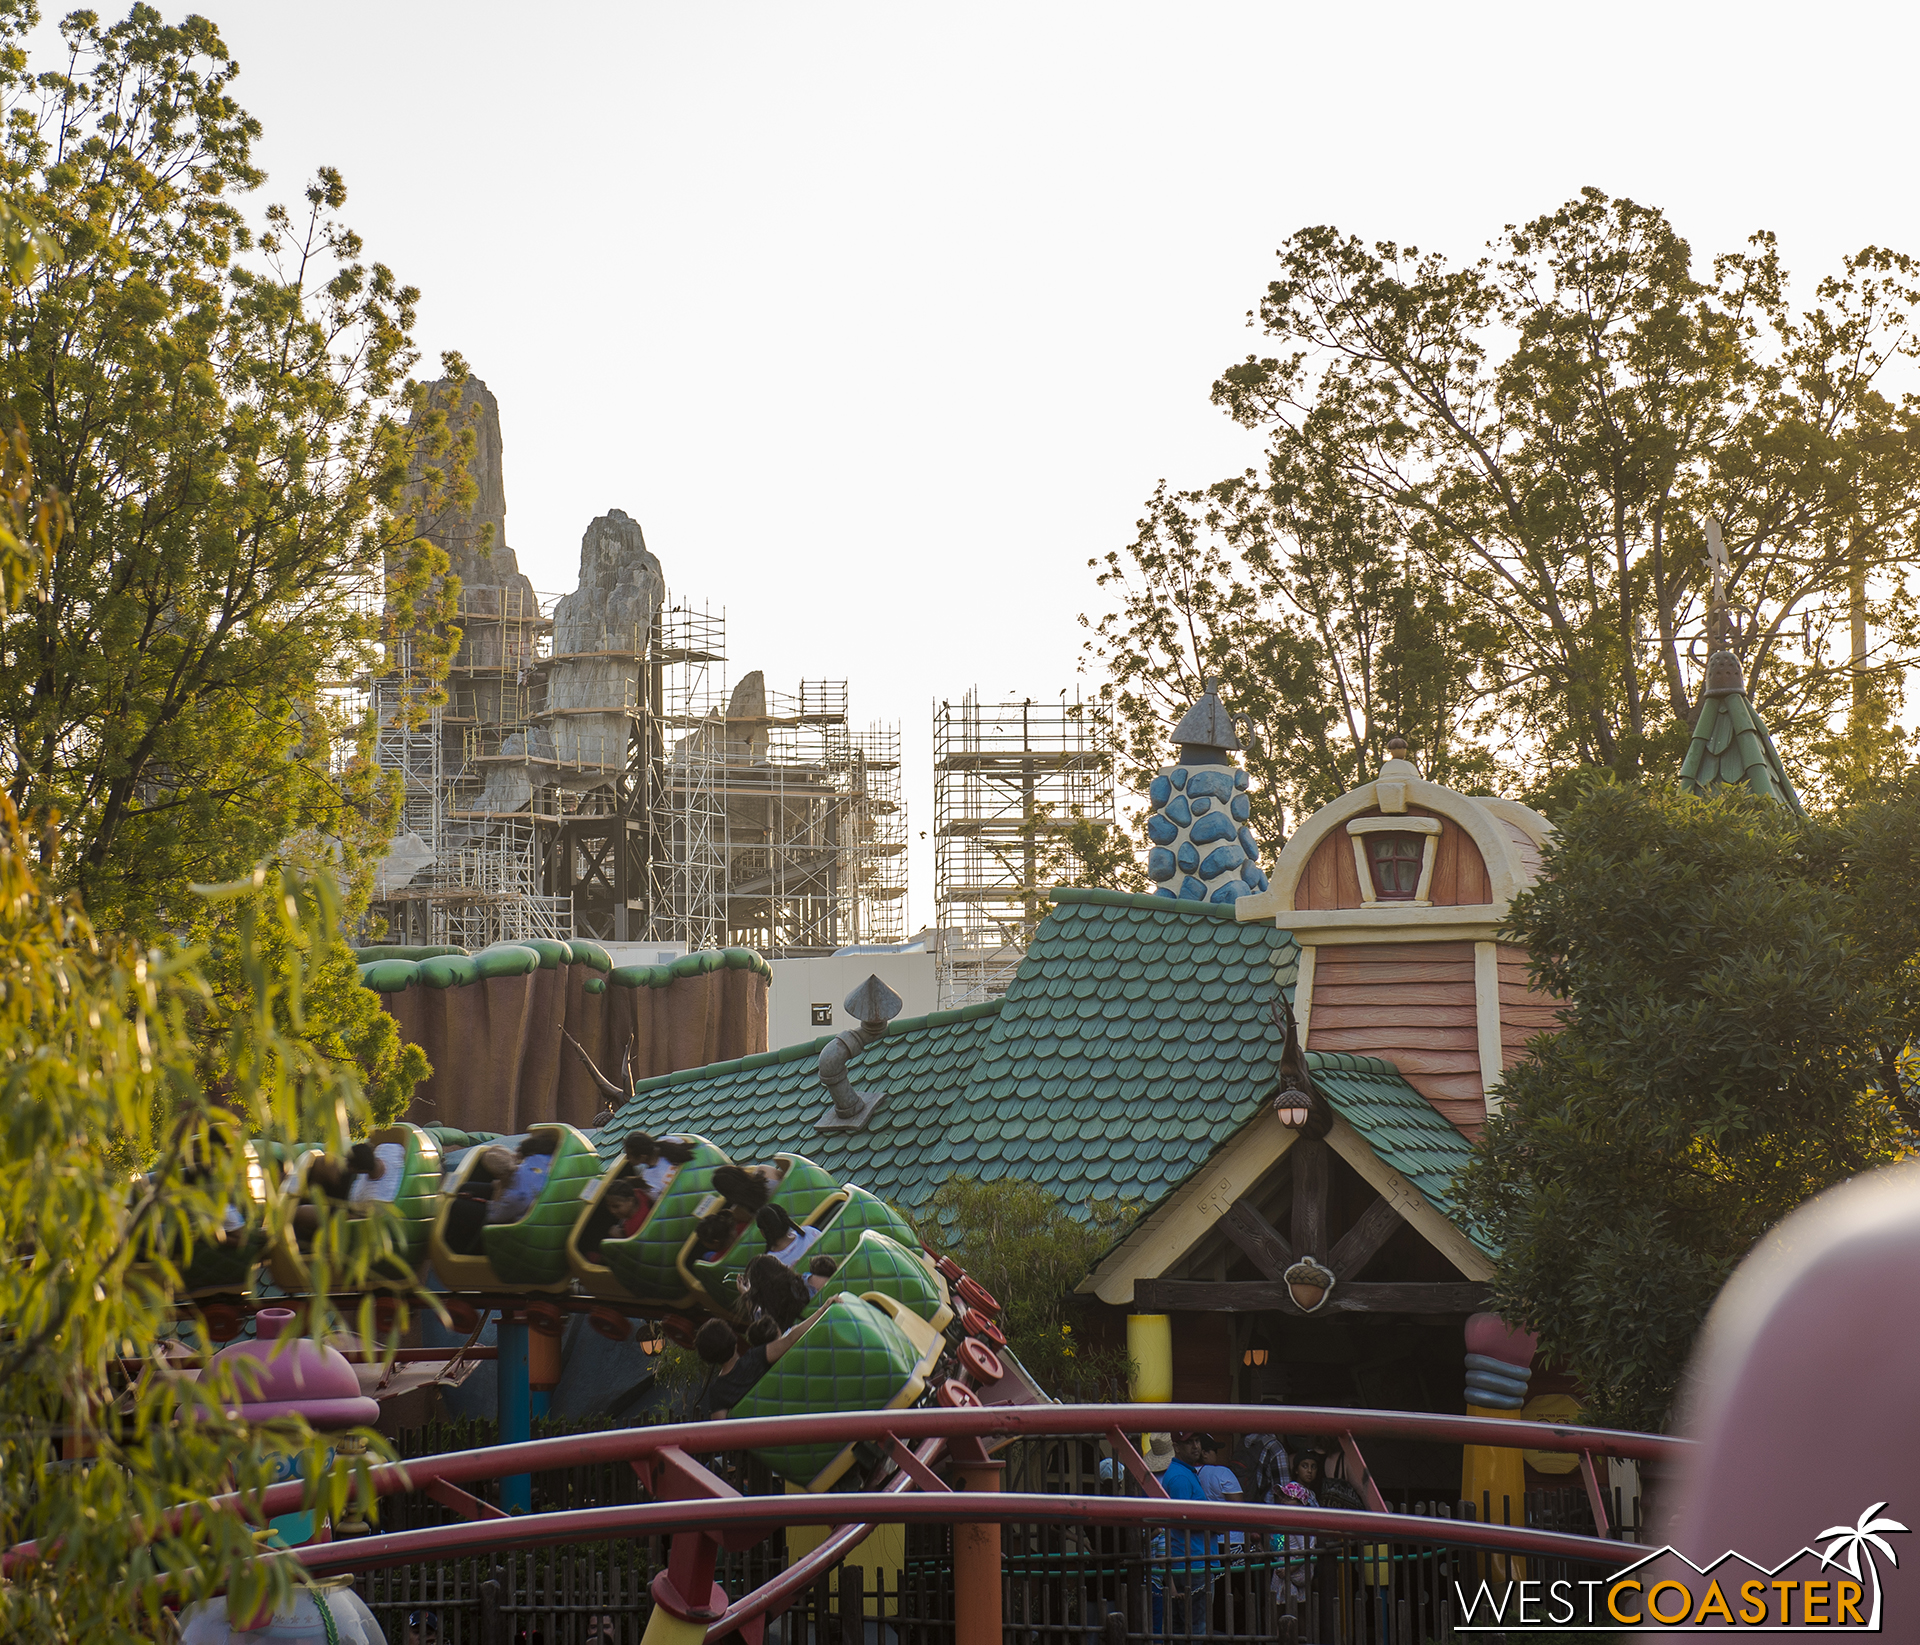  I guess if there is a canyon edge in the midground here at Mickey’s Toontown, one can justify buttes in the background coming from a different and aesthetically very different land. 